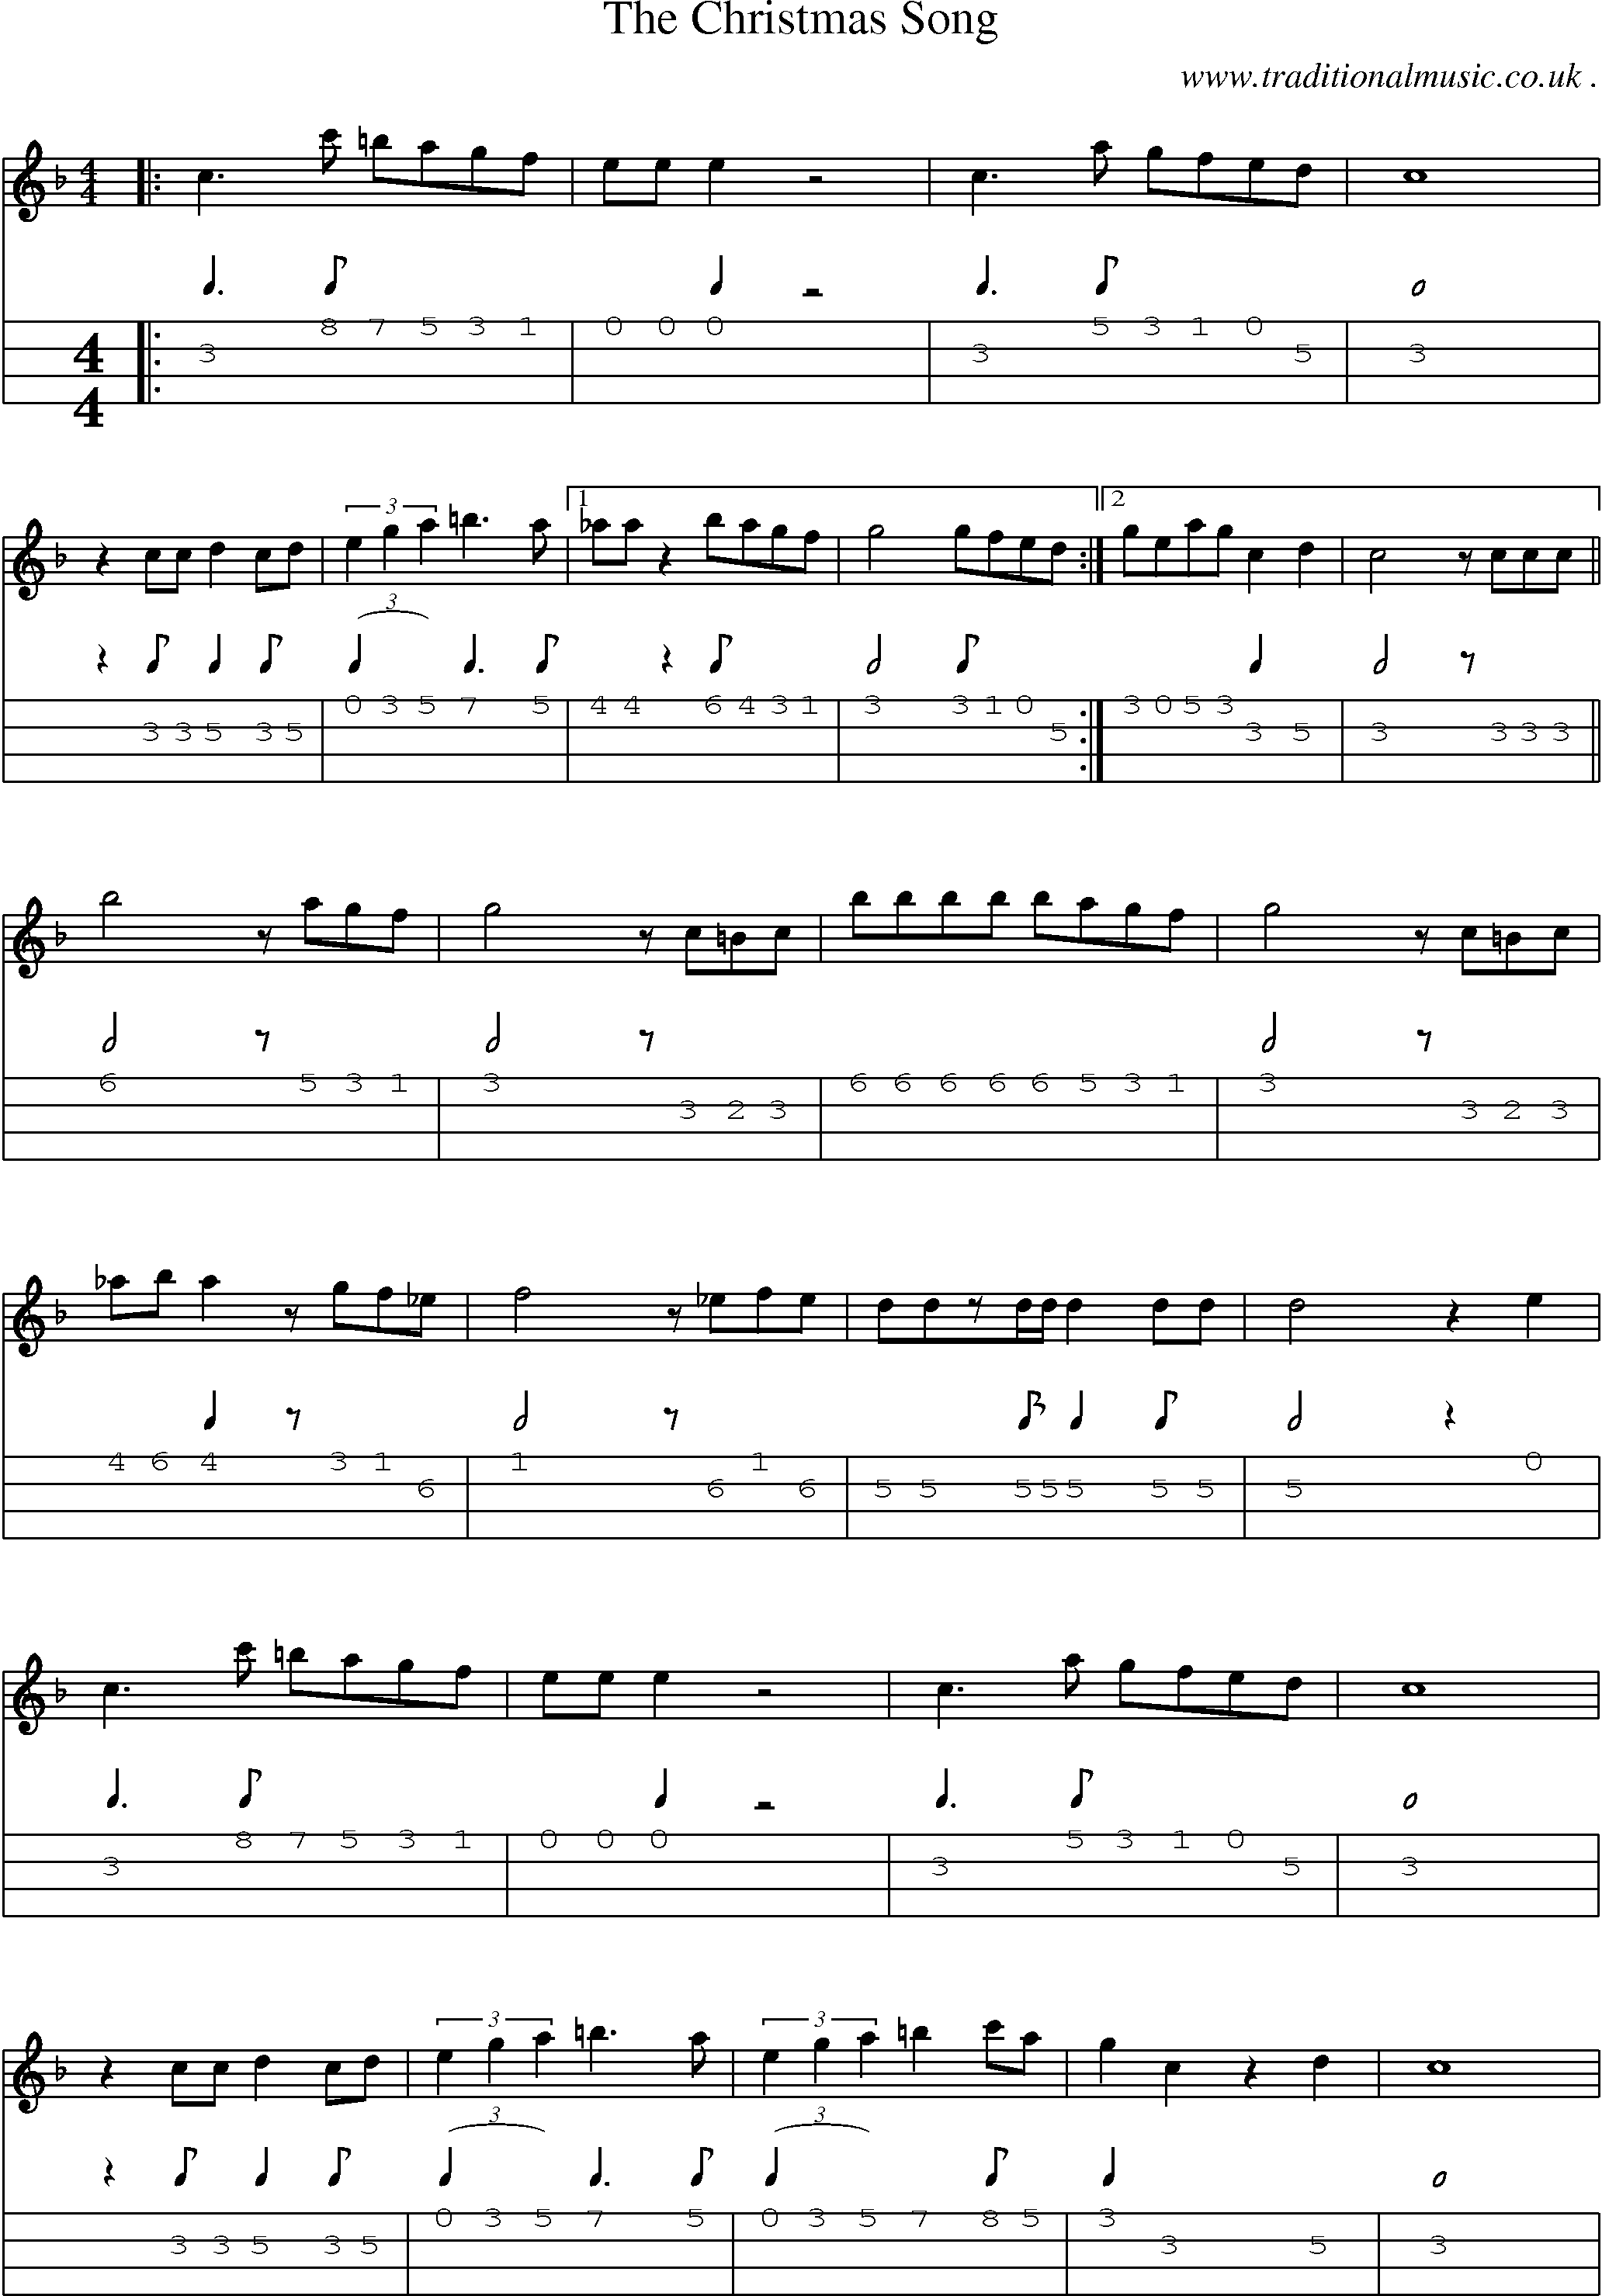 Music Score and Guitar Tabs for The Christmas Song